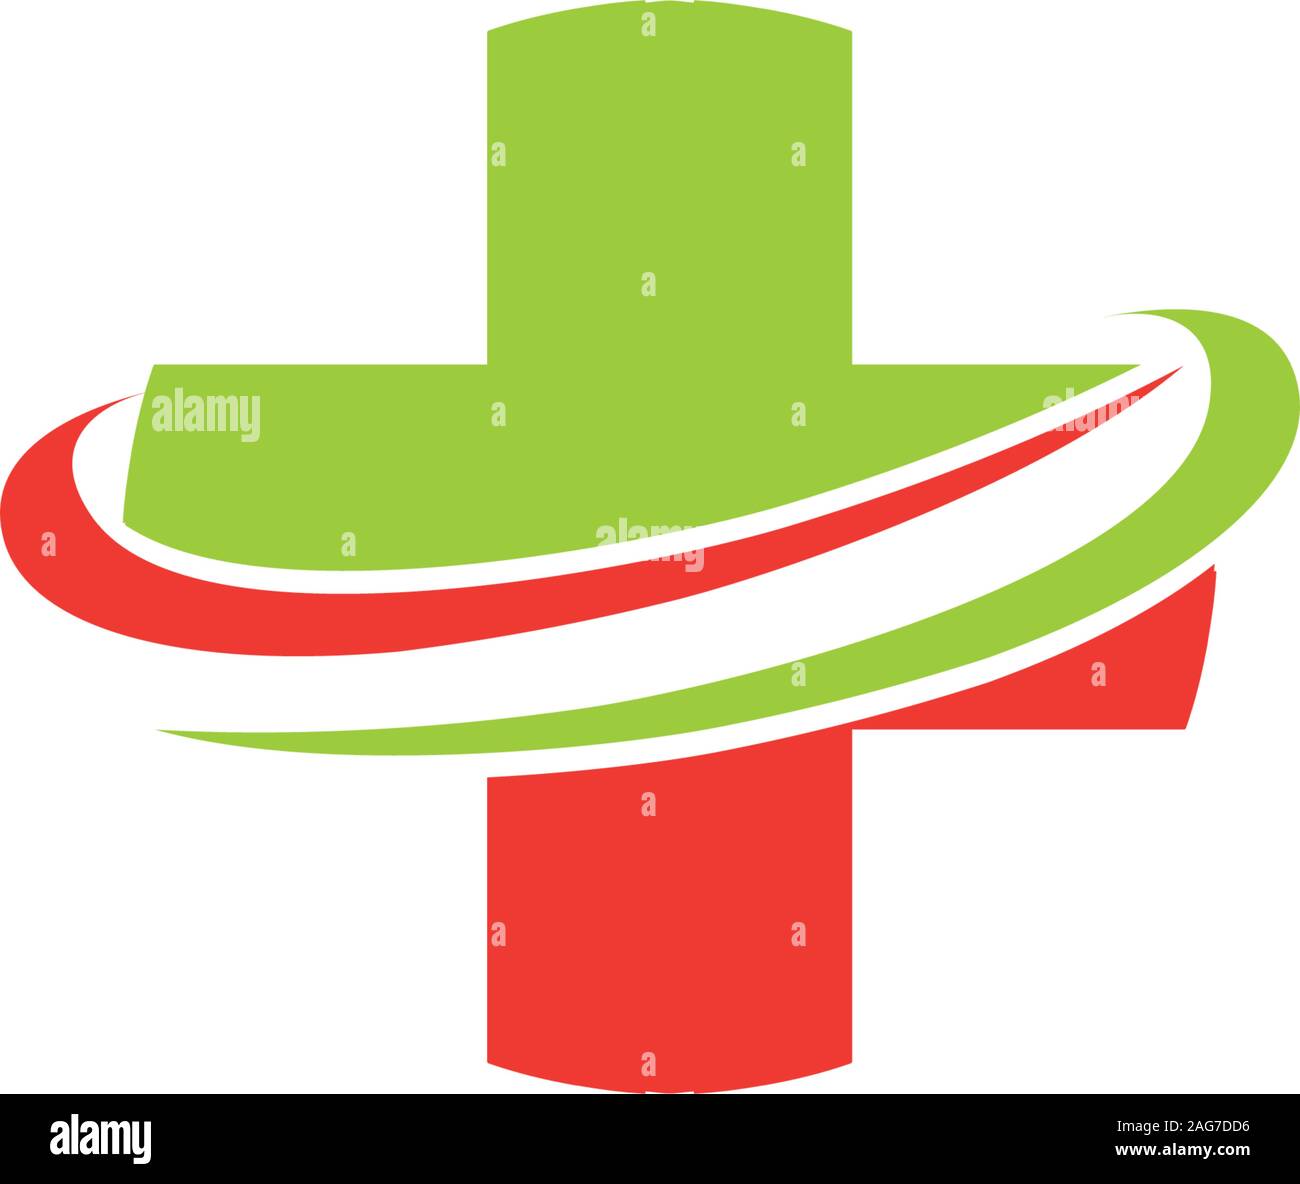 Red cross shop Stock Vector Images - Alamy